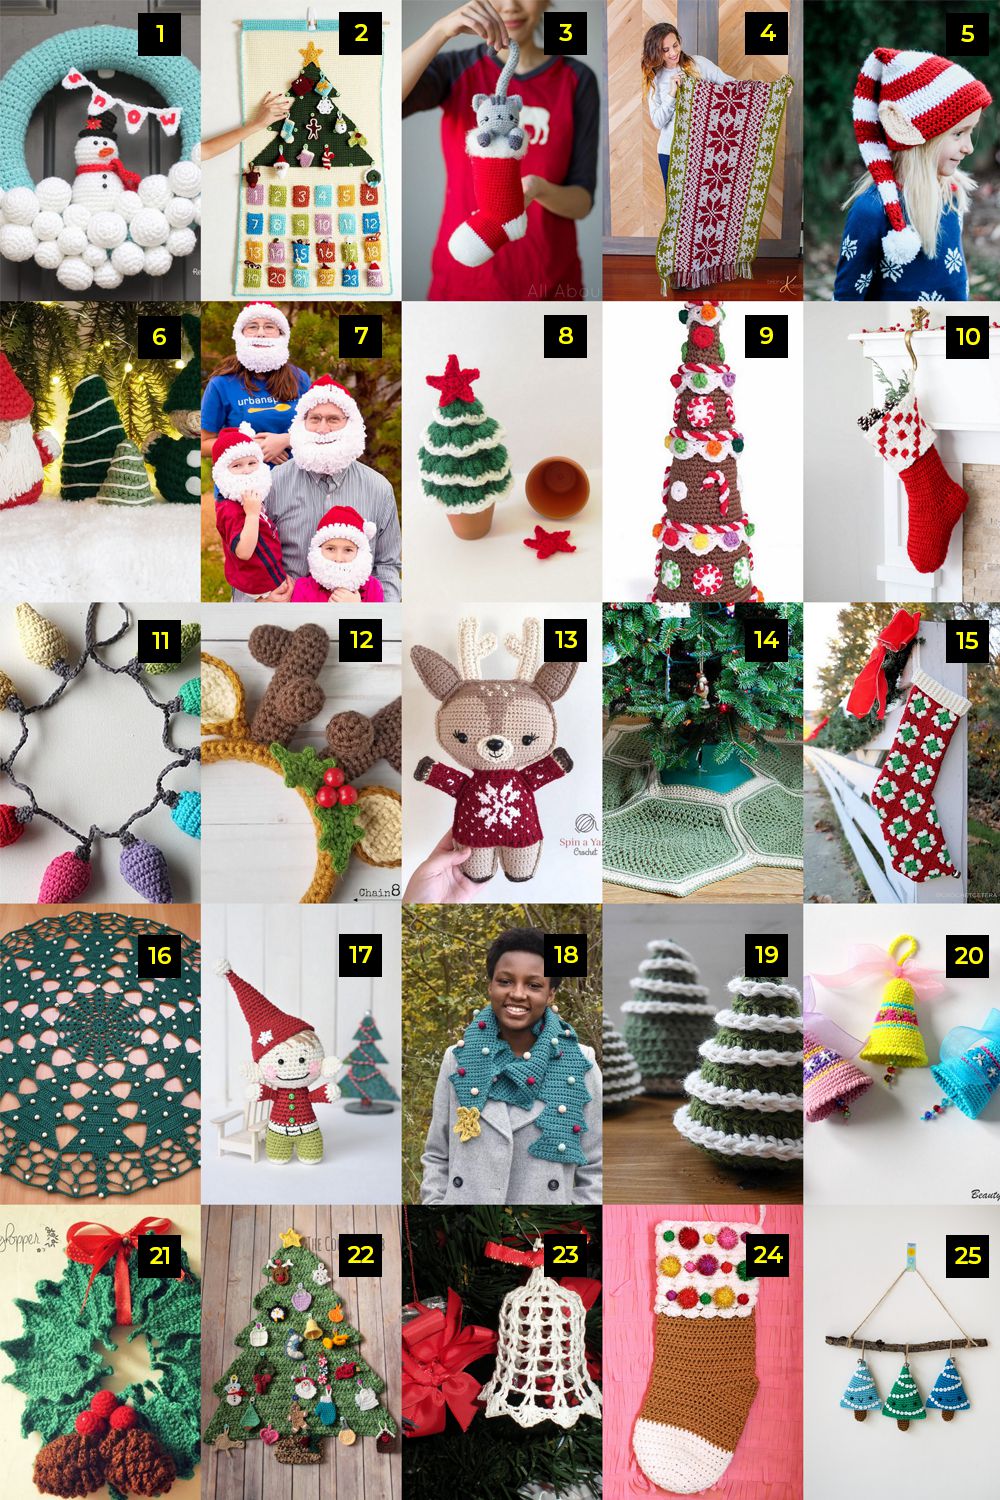 25 FREE Christmas Crochet Patterns You Need to Try for Your Holiday Party